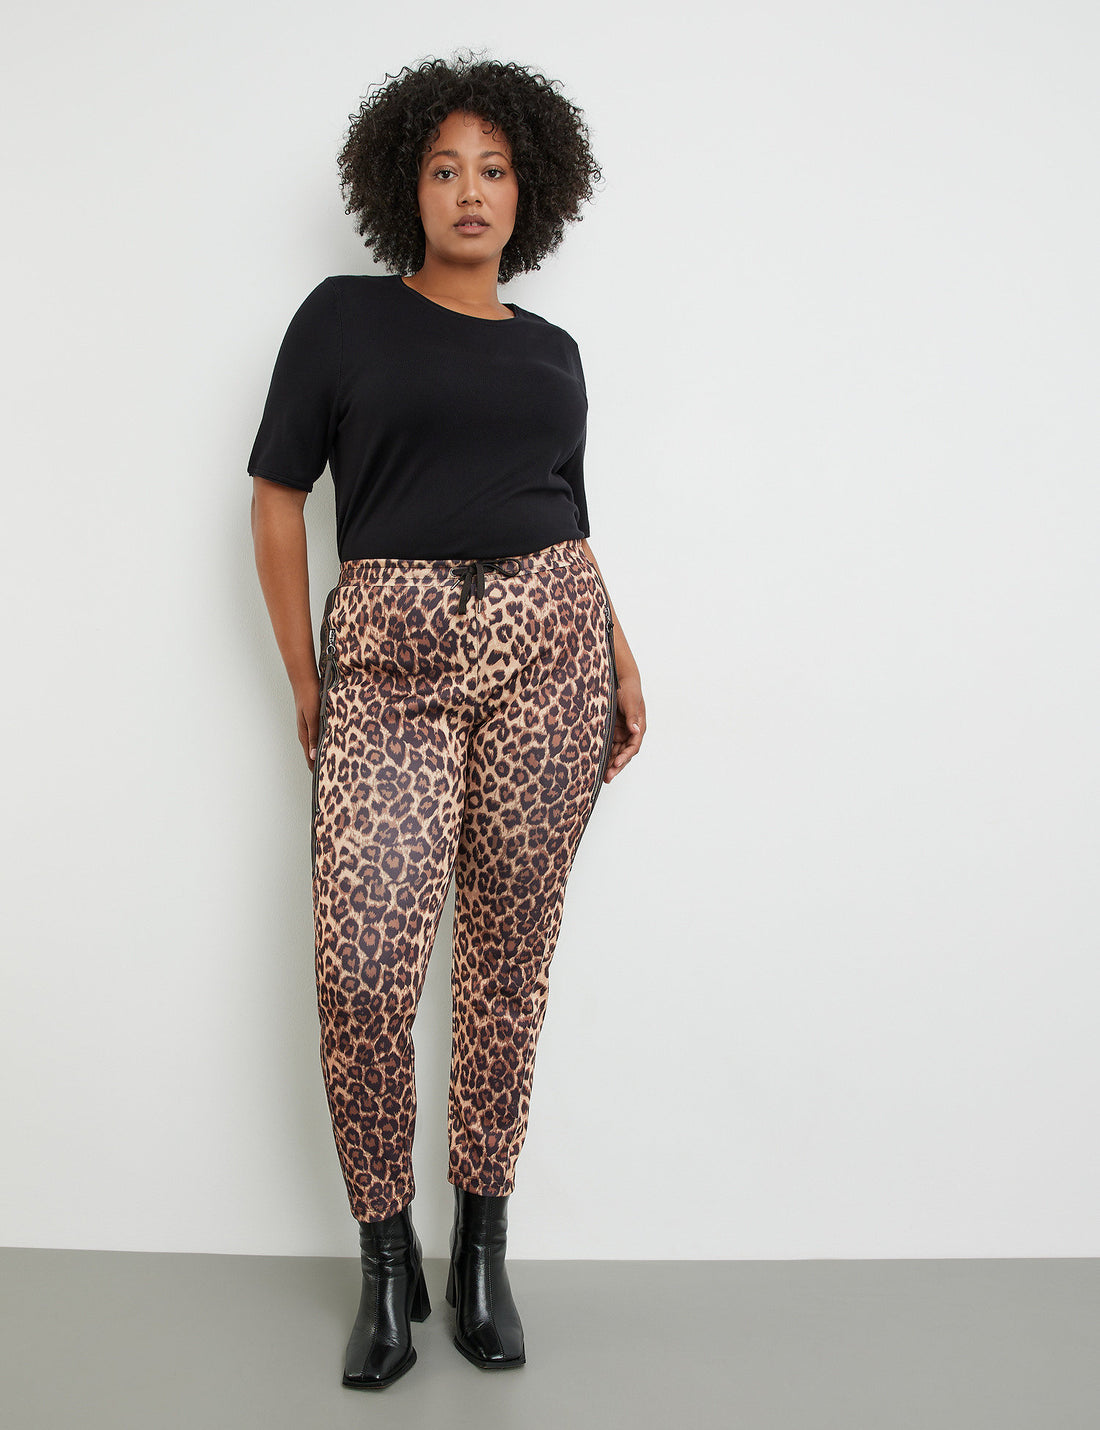 Tracksuit Bottoms With A Leopard Print Pattern_321203-26329_1102_01